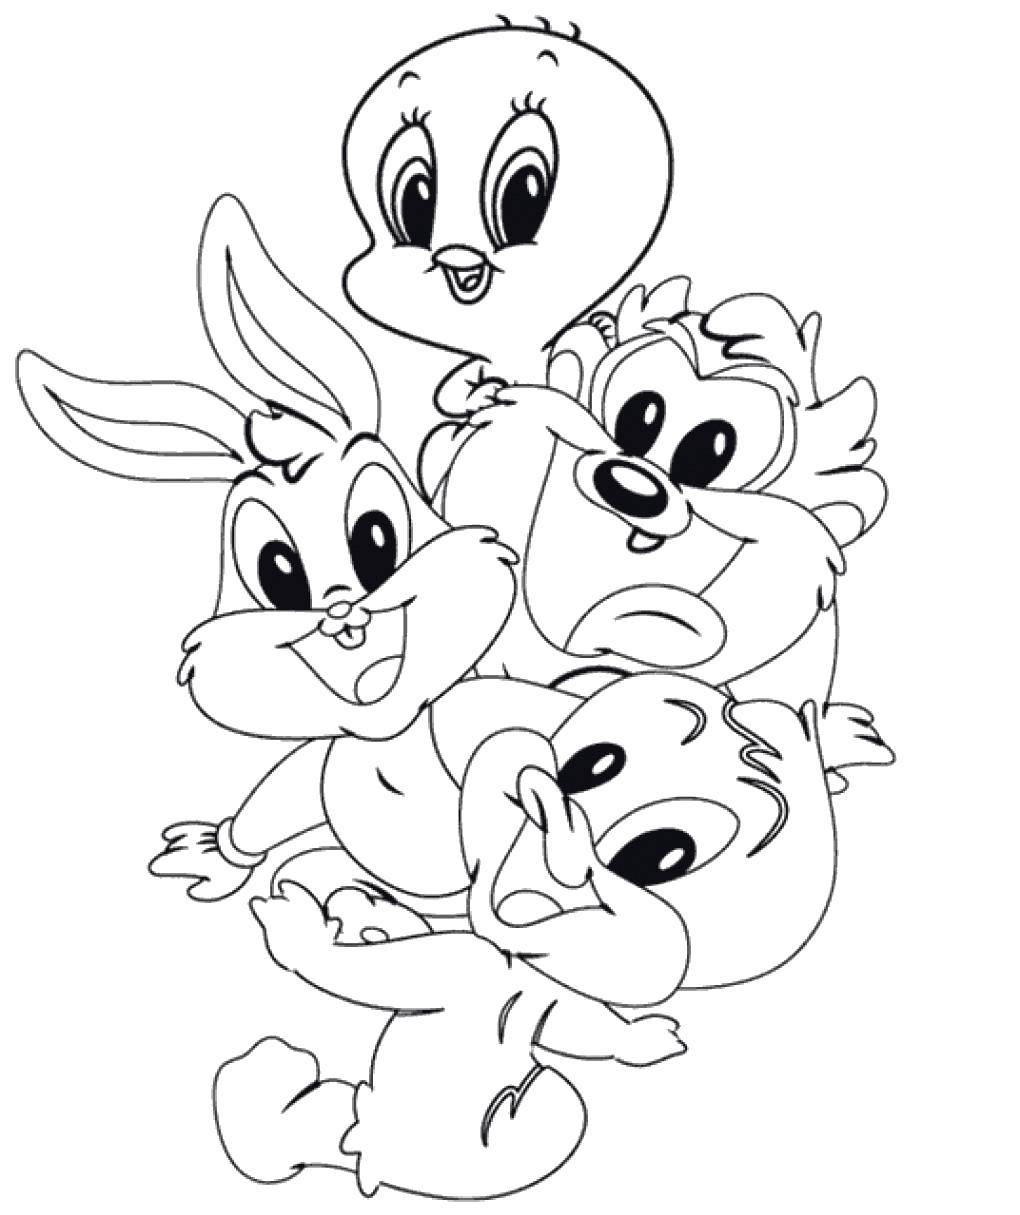 Coloring The Canary Tweety and friends. Category cartoons. Tags:  Disney, cartoon.